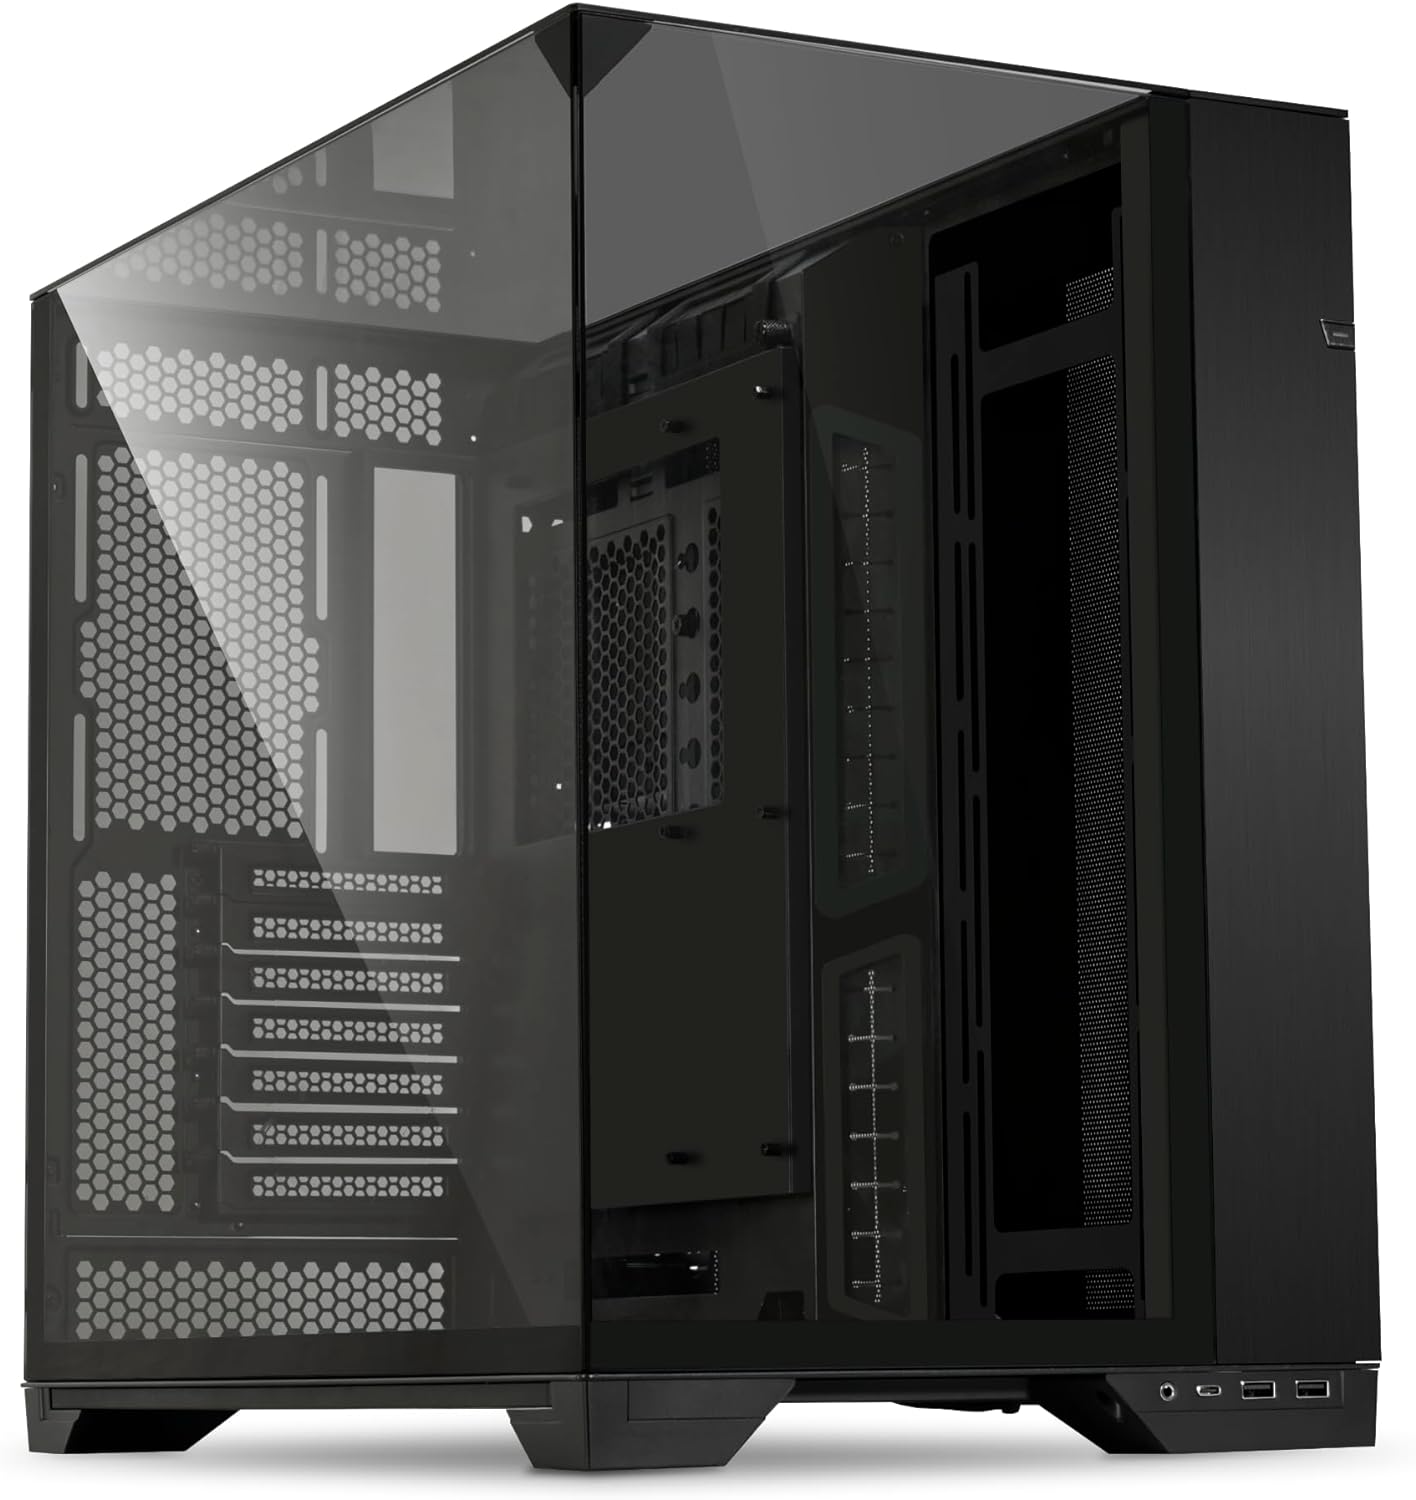 Lian Li O11 Vision -Three Sided Tempered Glass Panels  - Dual-Chamber ATX Mid Tower GAMING CASE